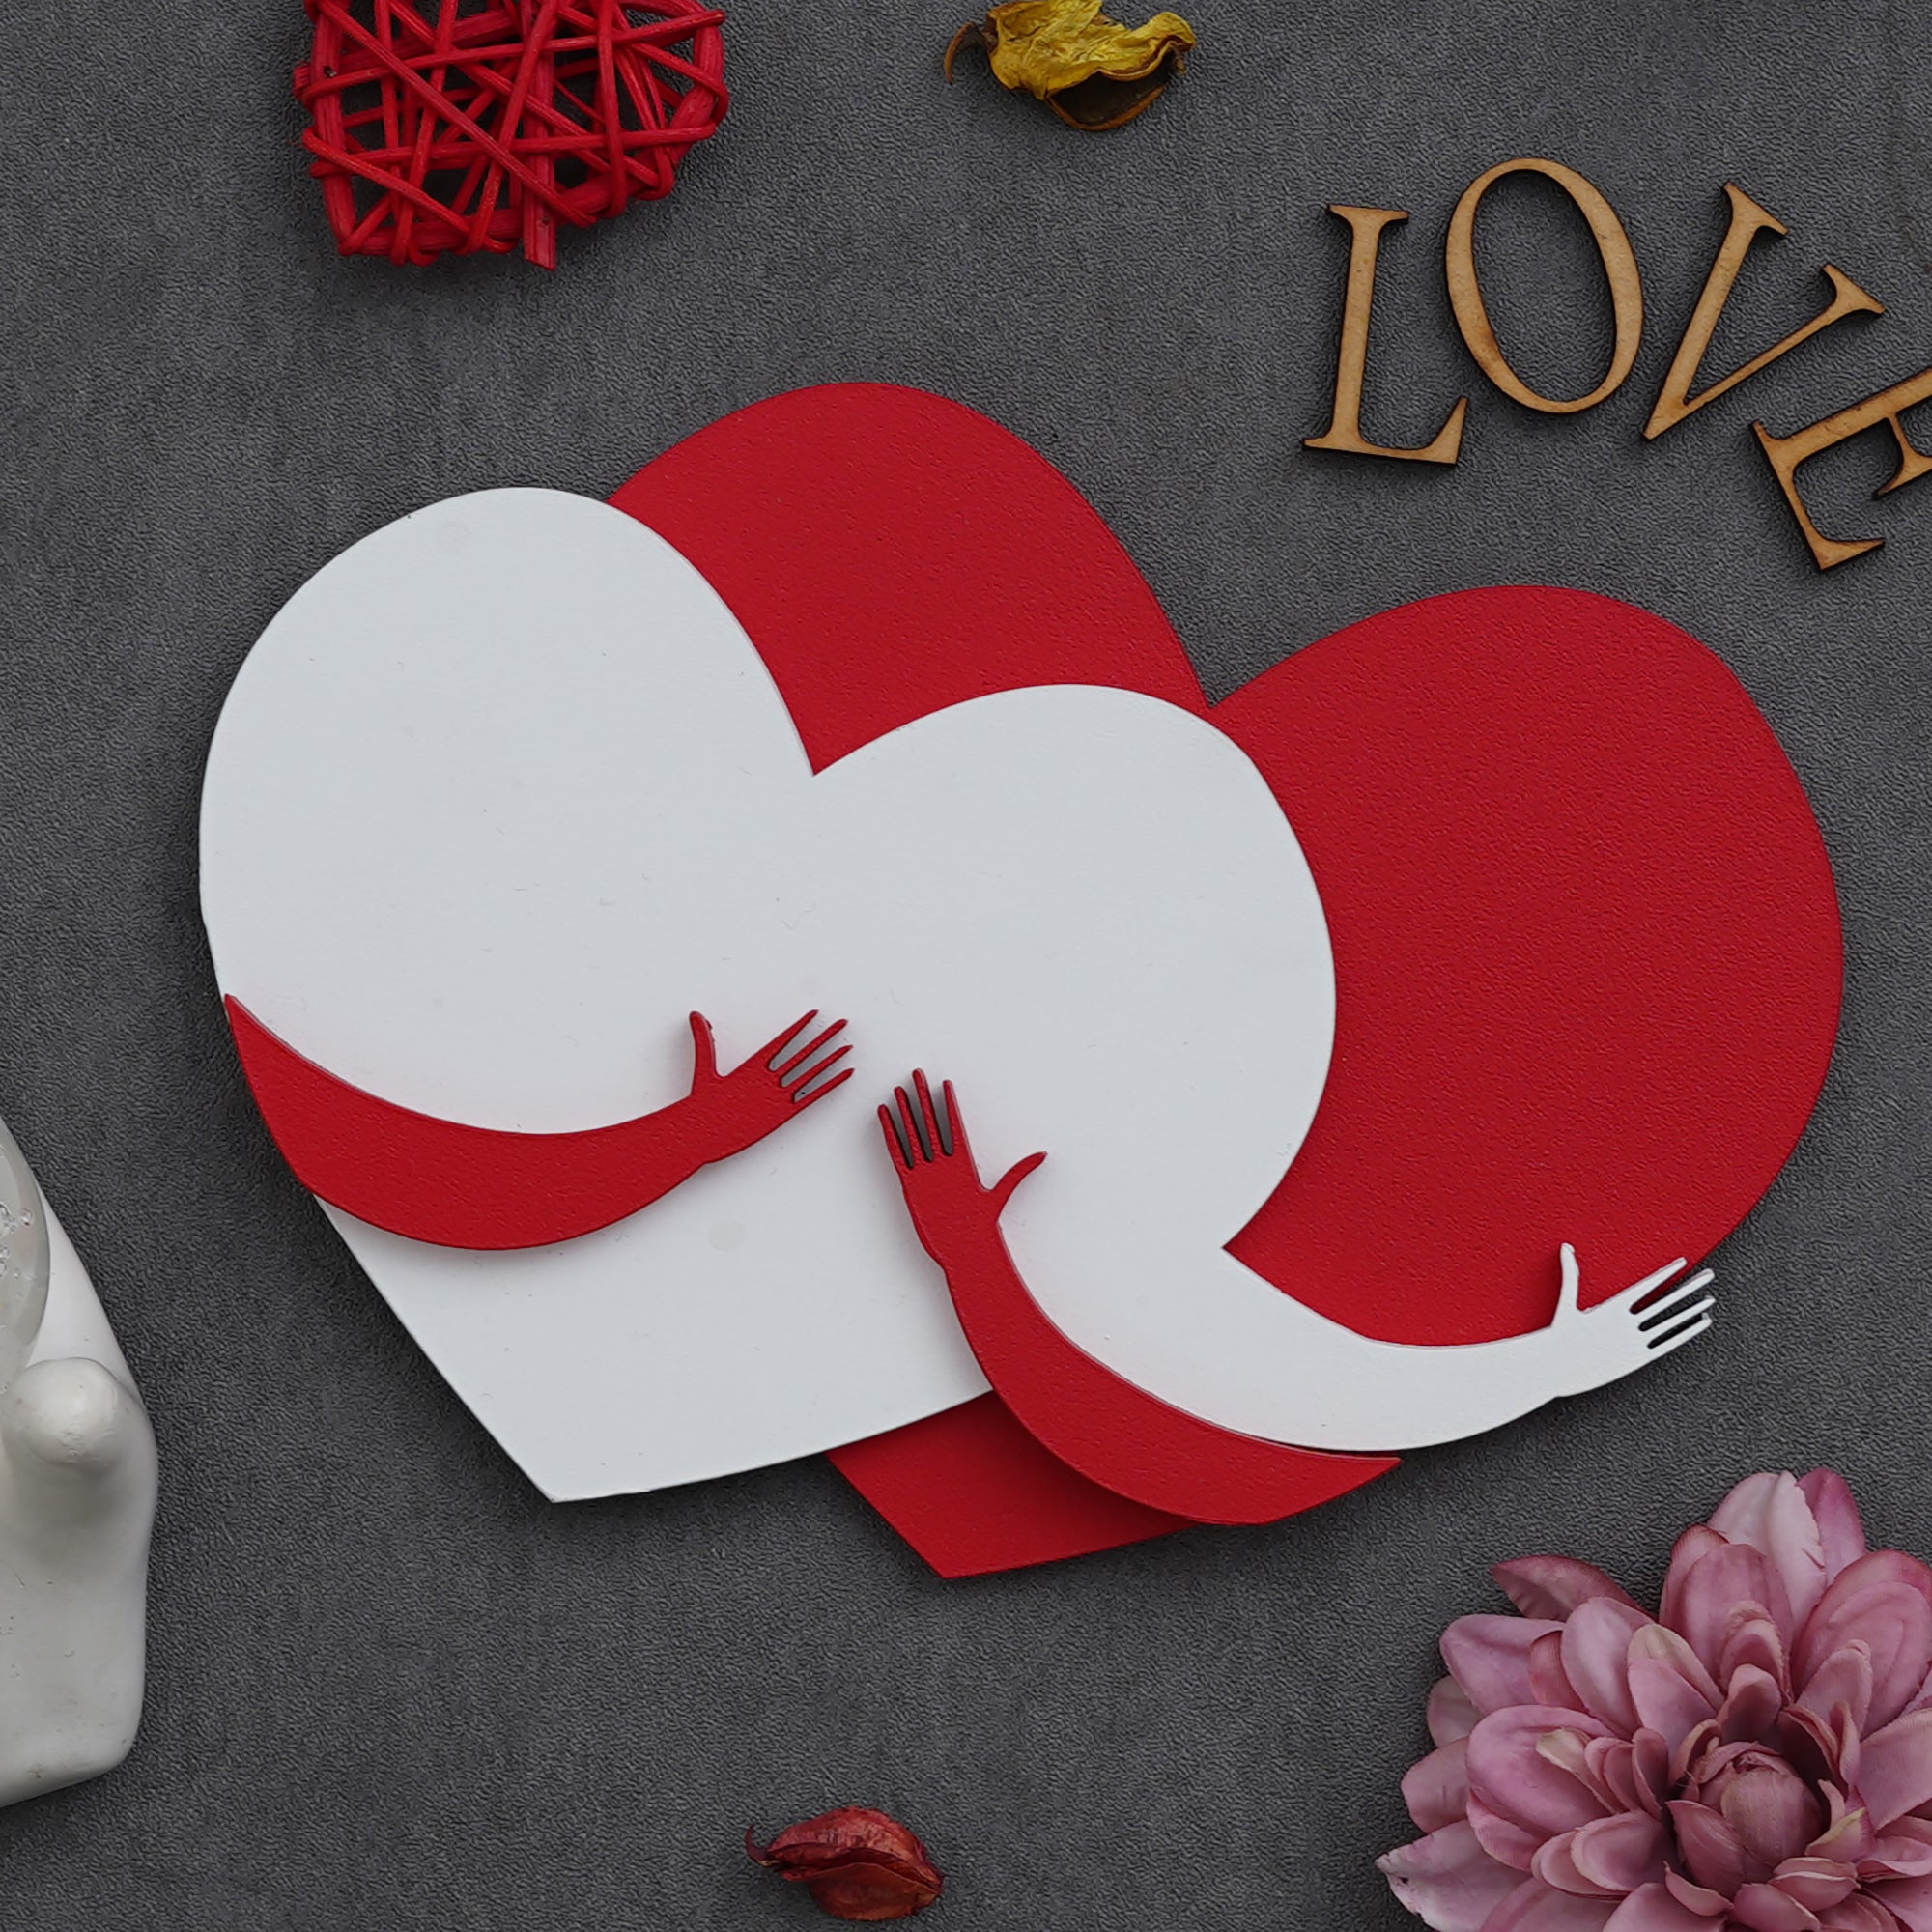 Valentine Combo of Pack of 8 Love Gift Cards, Golden Rose Gift Set, Red and White Heart Hugging Each Other Gift Set 5